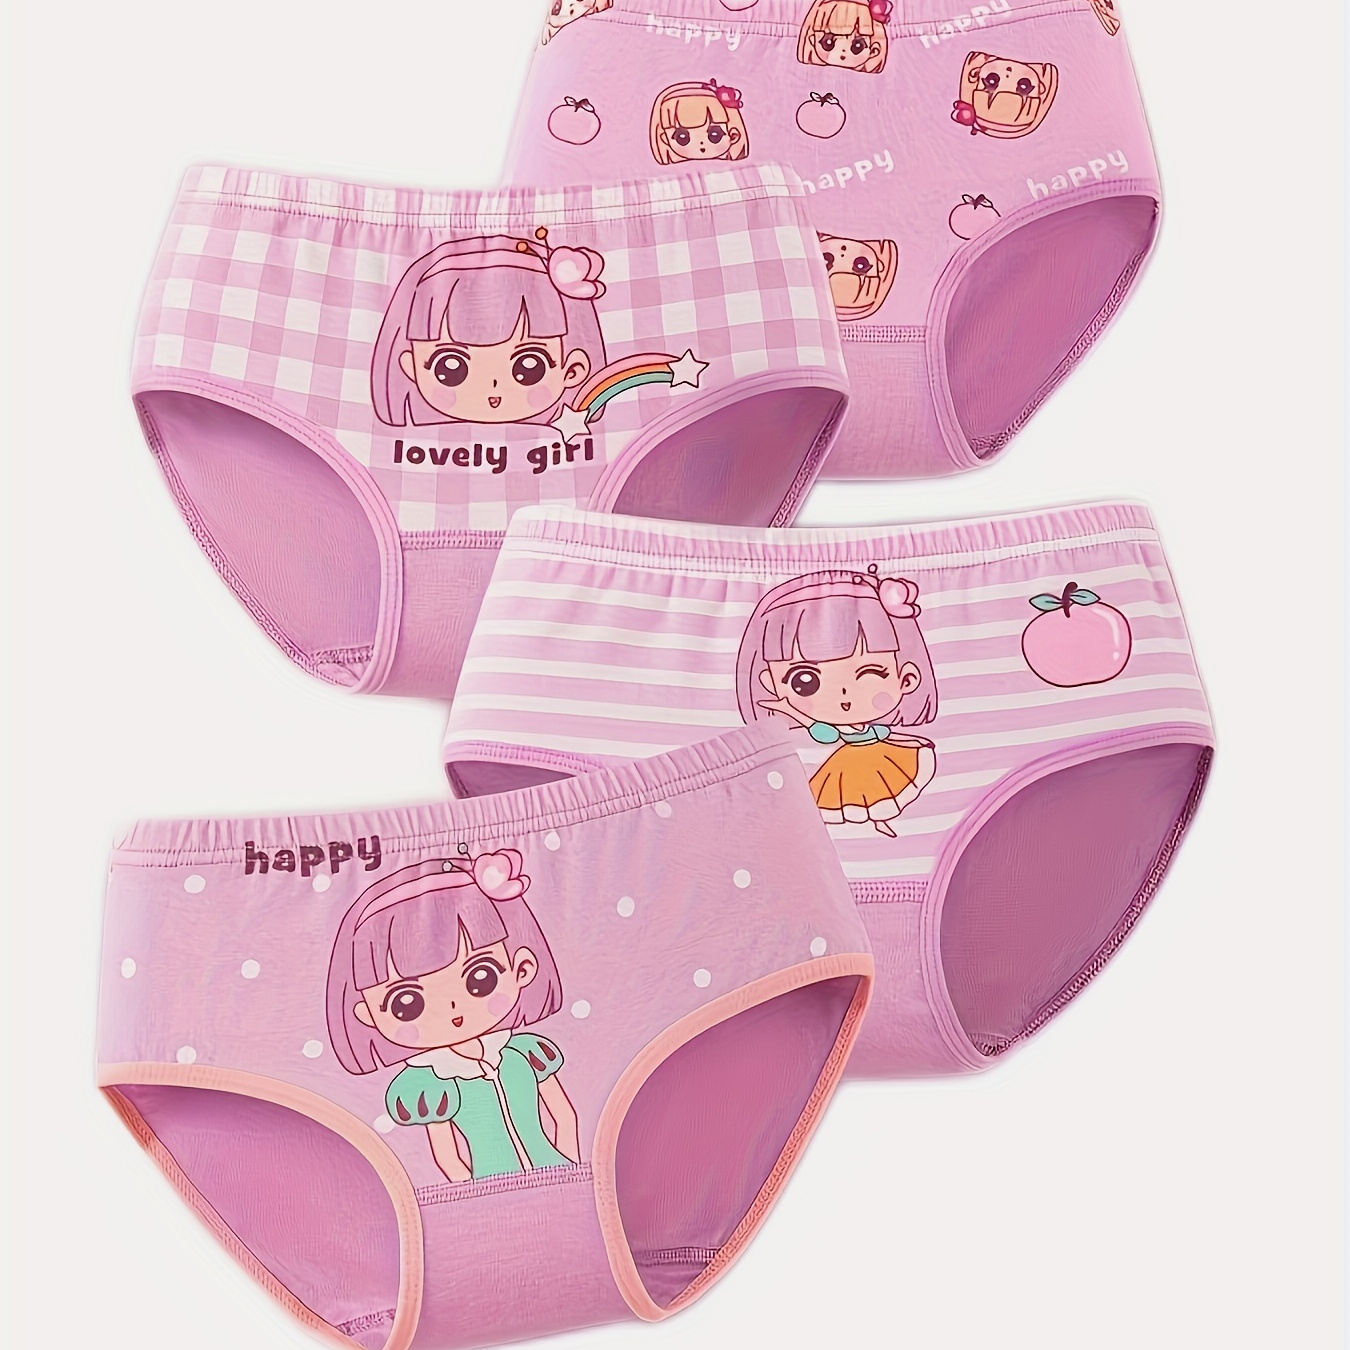 Tomkot Stylish and cute cartoon underwear women's panties, let you